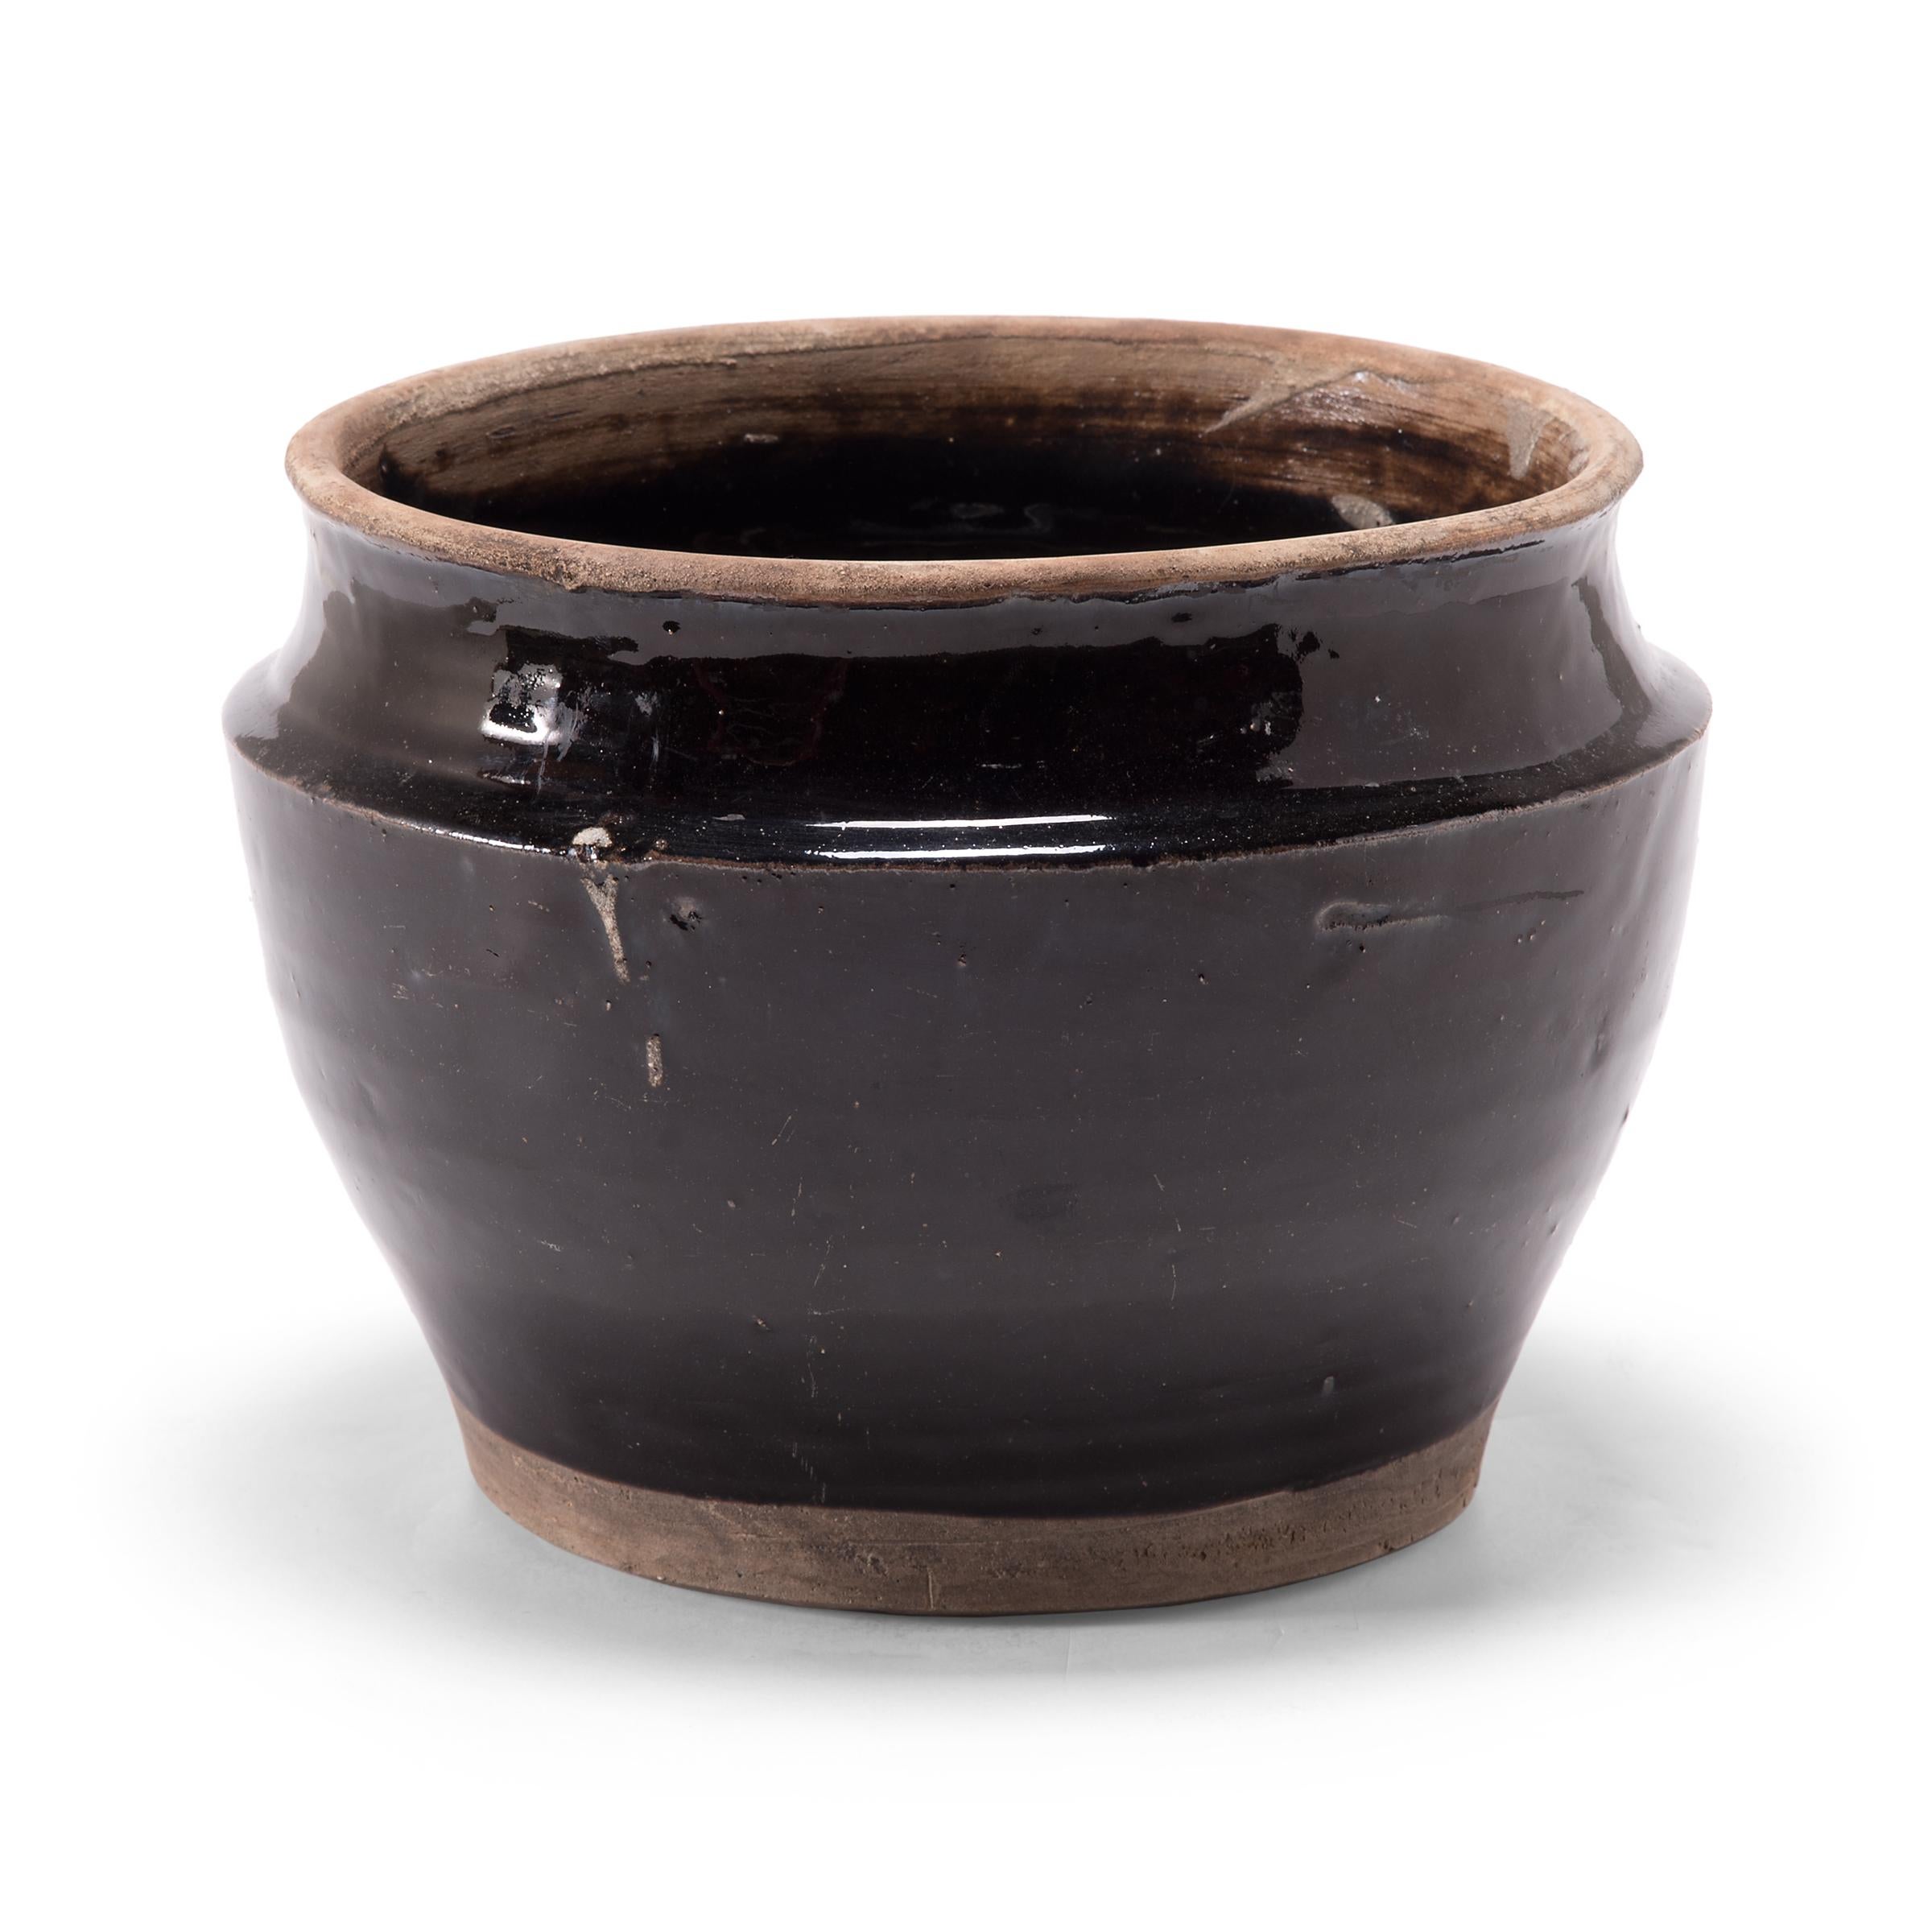 A dark glaze cloaks the high, angular shoulders and tapered body of this squat kitchen vessel, save for the unfinished lip and base. The early 20th century ceramic basin was once used for pickling foods in a Qing-dynasty kitchen, as evidenced by its